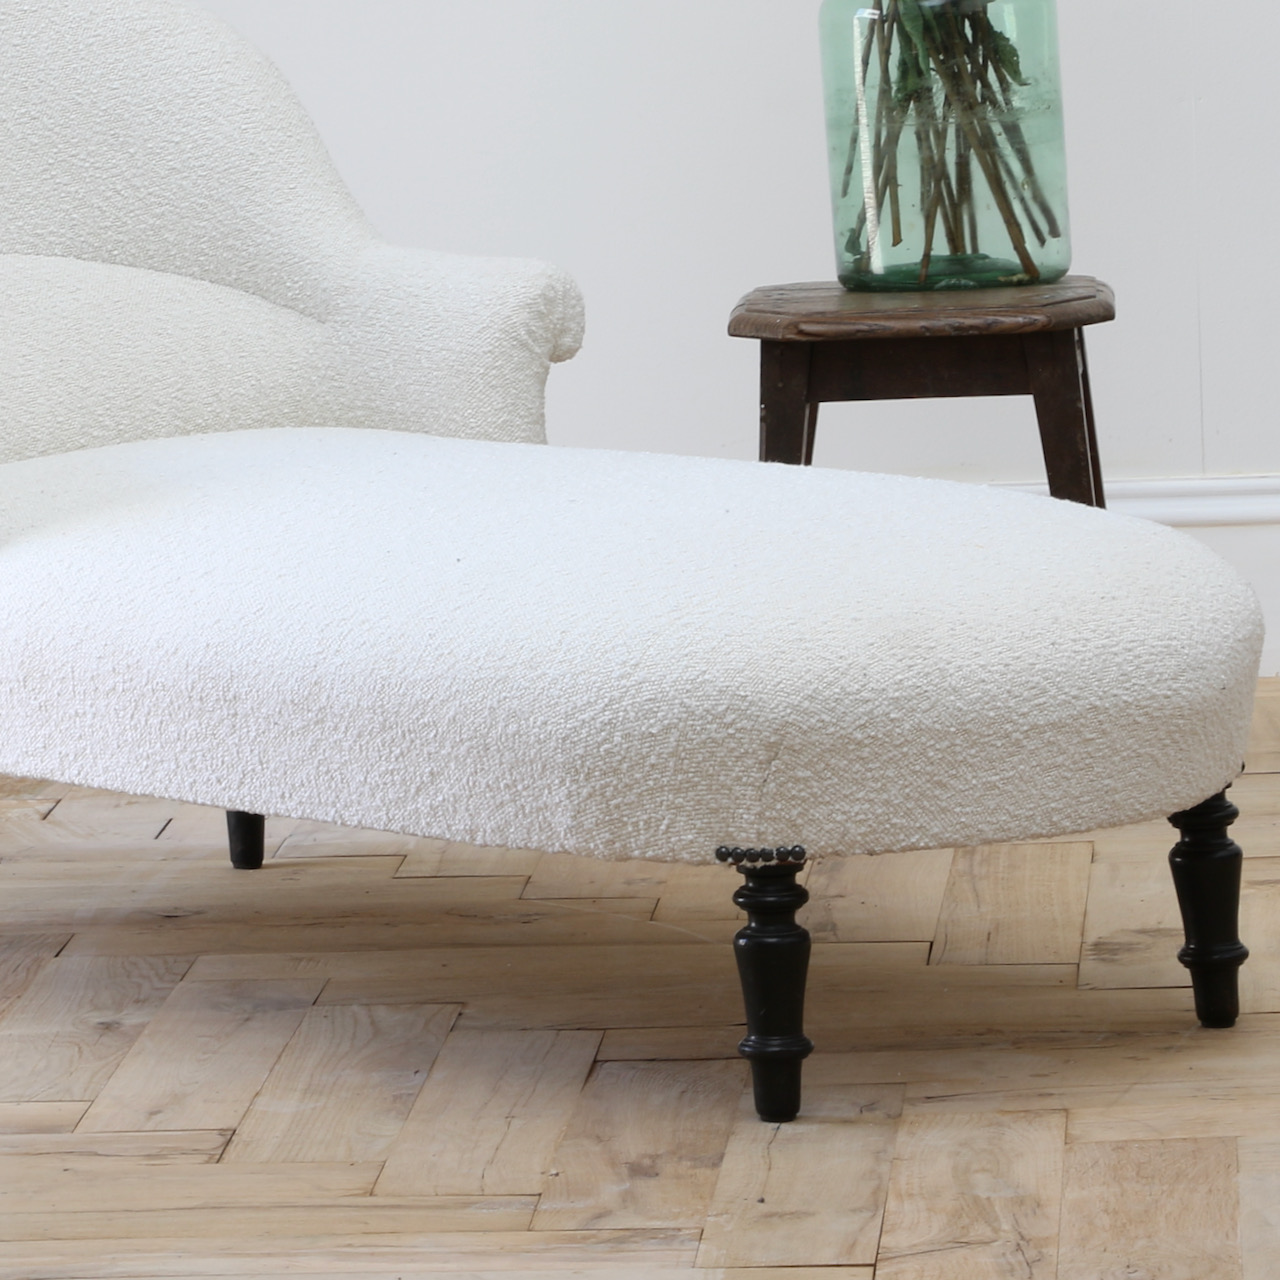 French Chaise Longue